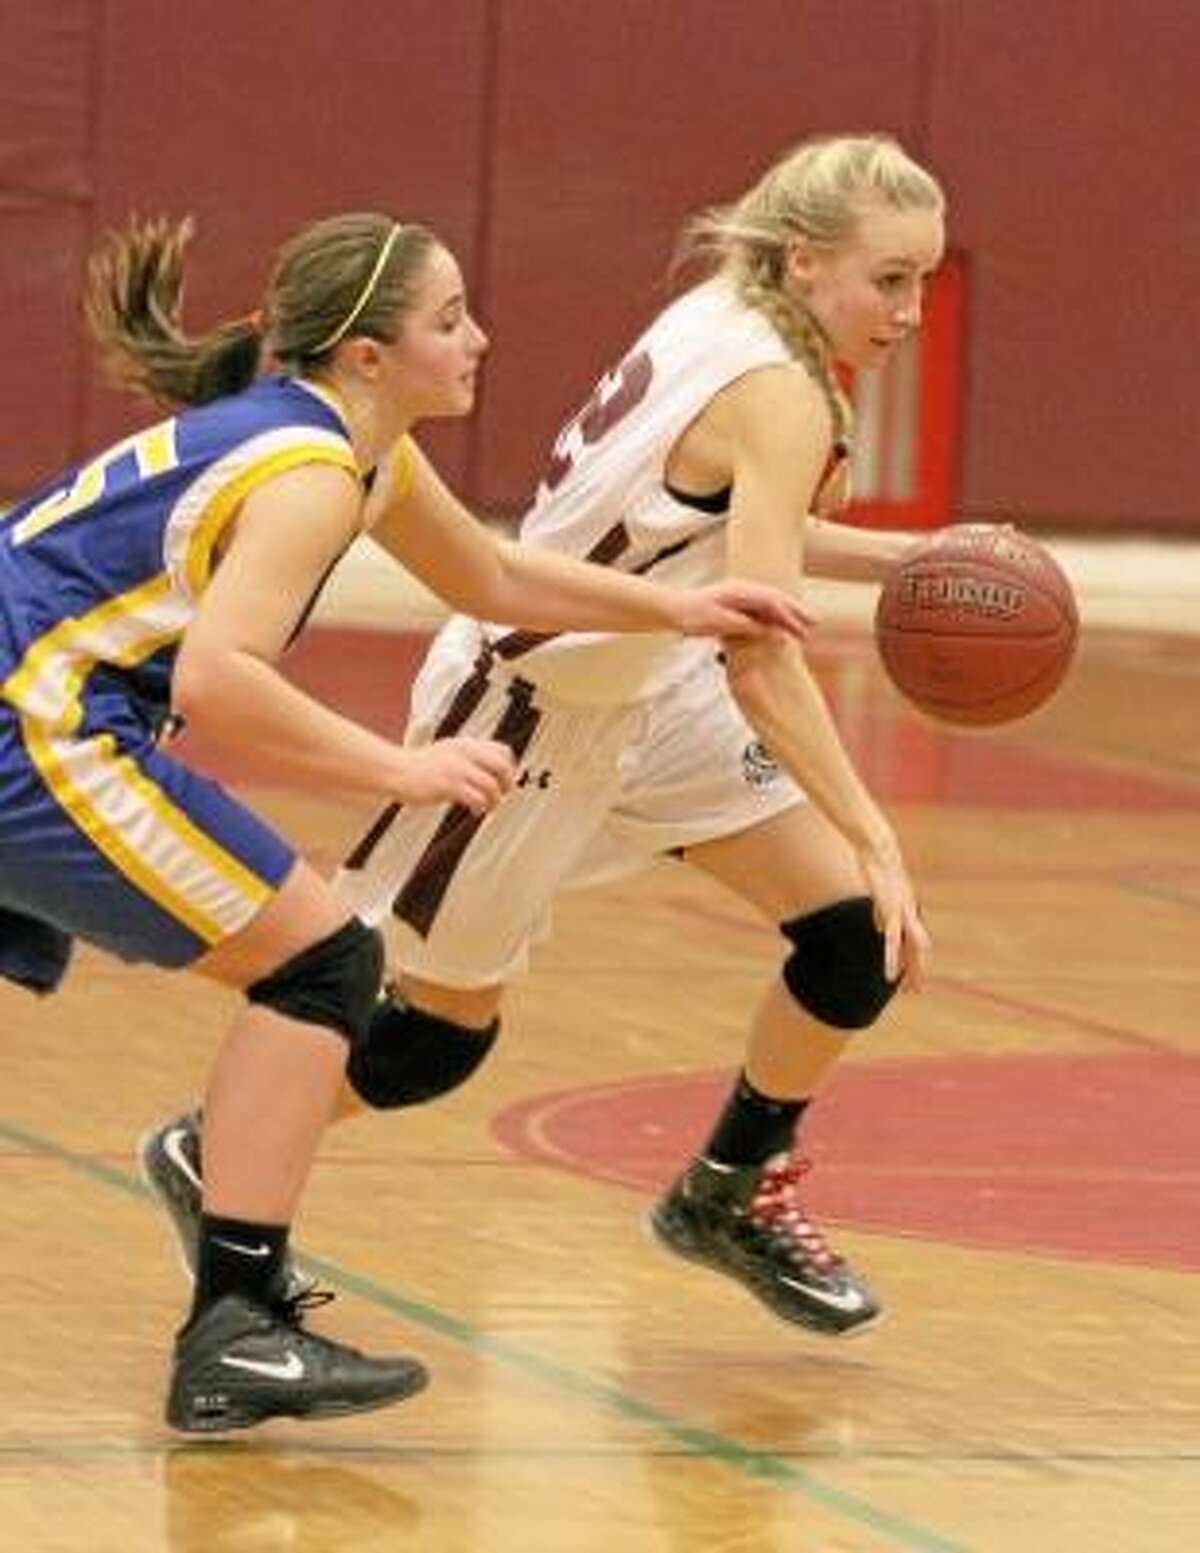 Torrington's Paige Middleton dribbles down the court. Photo by Marianne Killackey/Special to Register Citizen